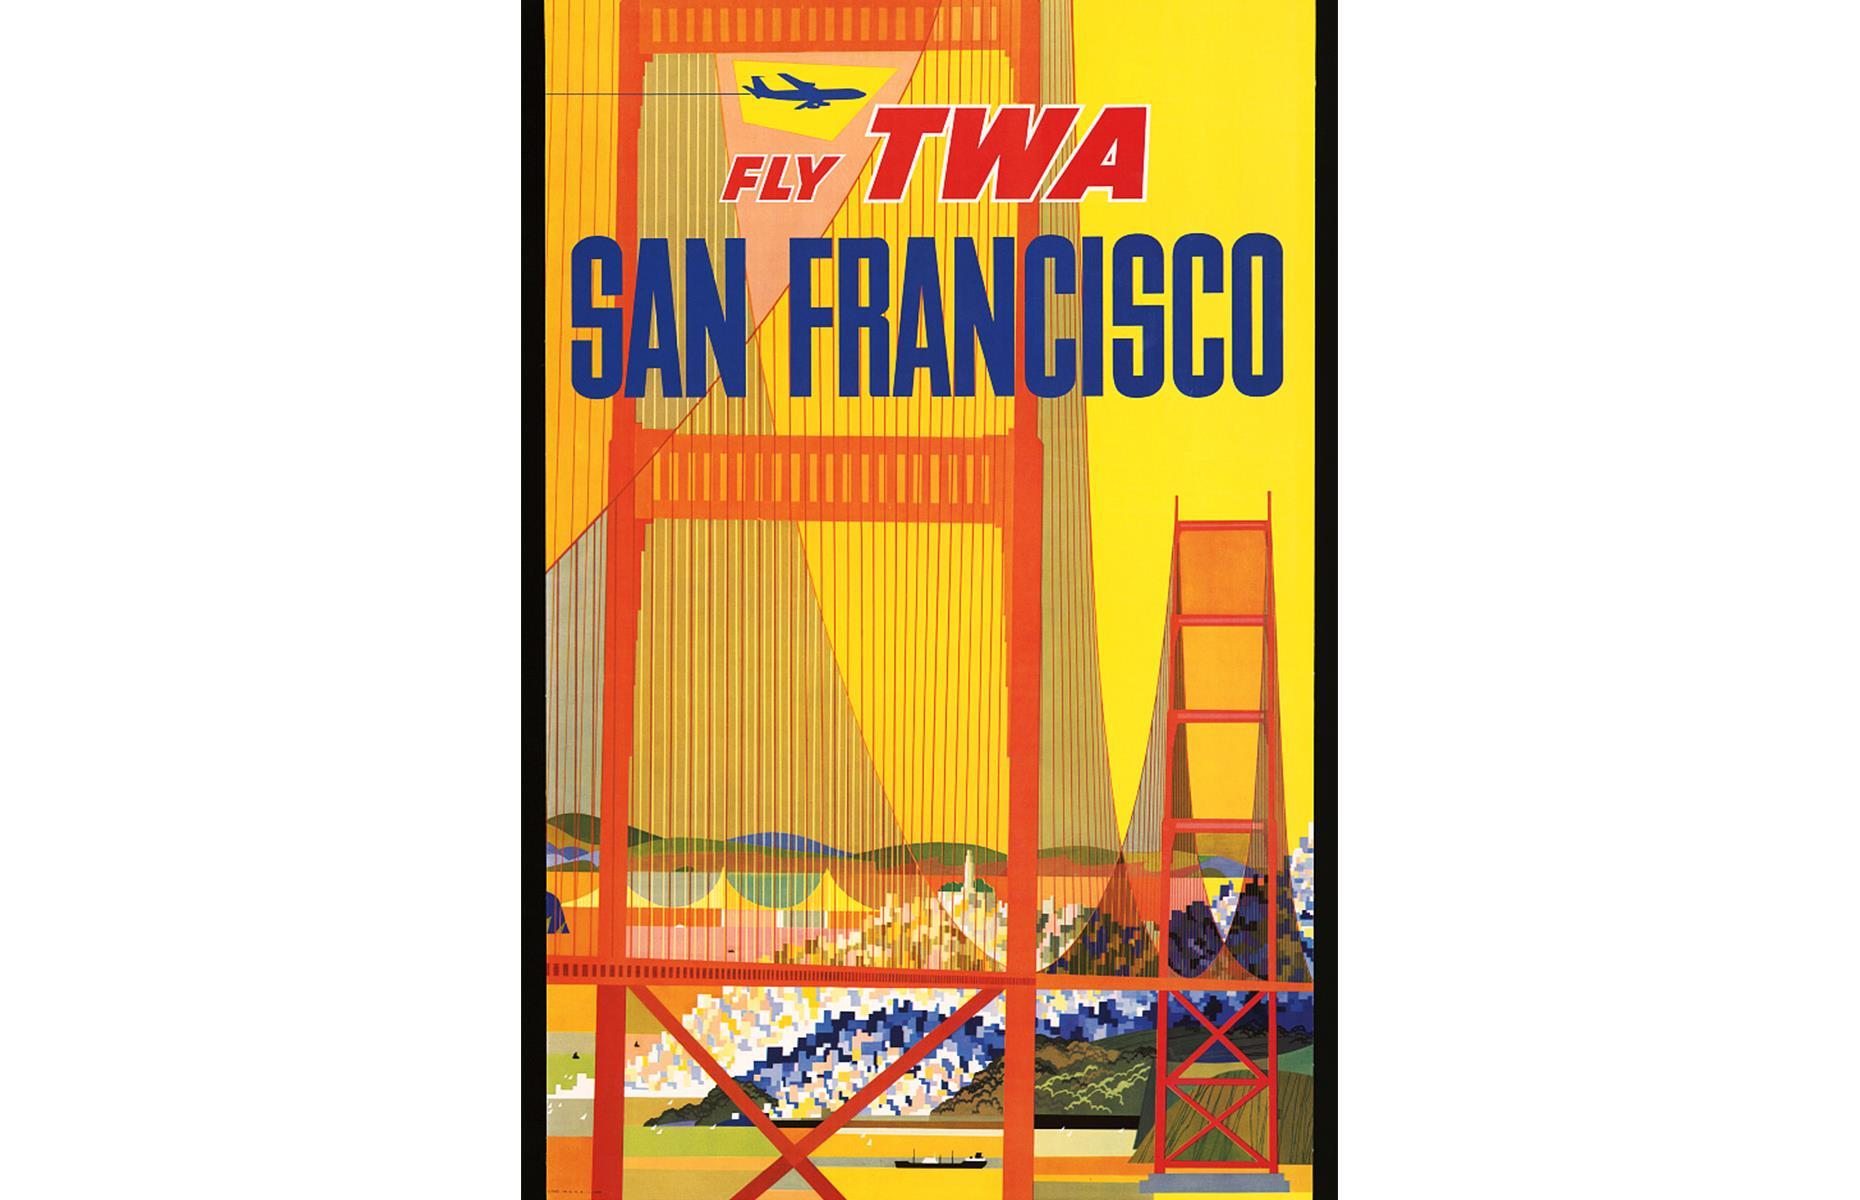 <p>San Francisco's cityscape turns heads in this vivid advert. It's the work of Trans World Airlines (TWA), a major American airline that operated from the 1930s right up until the early Noughties, when it eventually came under the American Airlines brand. This poster dates to the airline's 1950s heyday and the bold design, dominated by the Golden Gate Bridge, was created by American artist David Klein. </p>